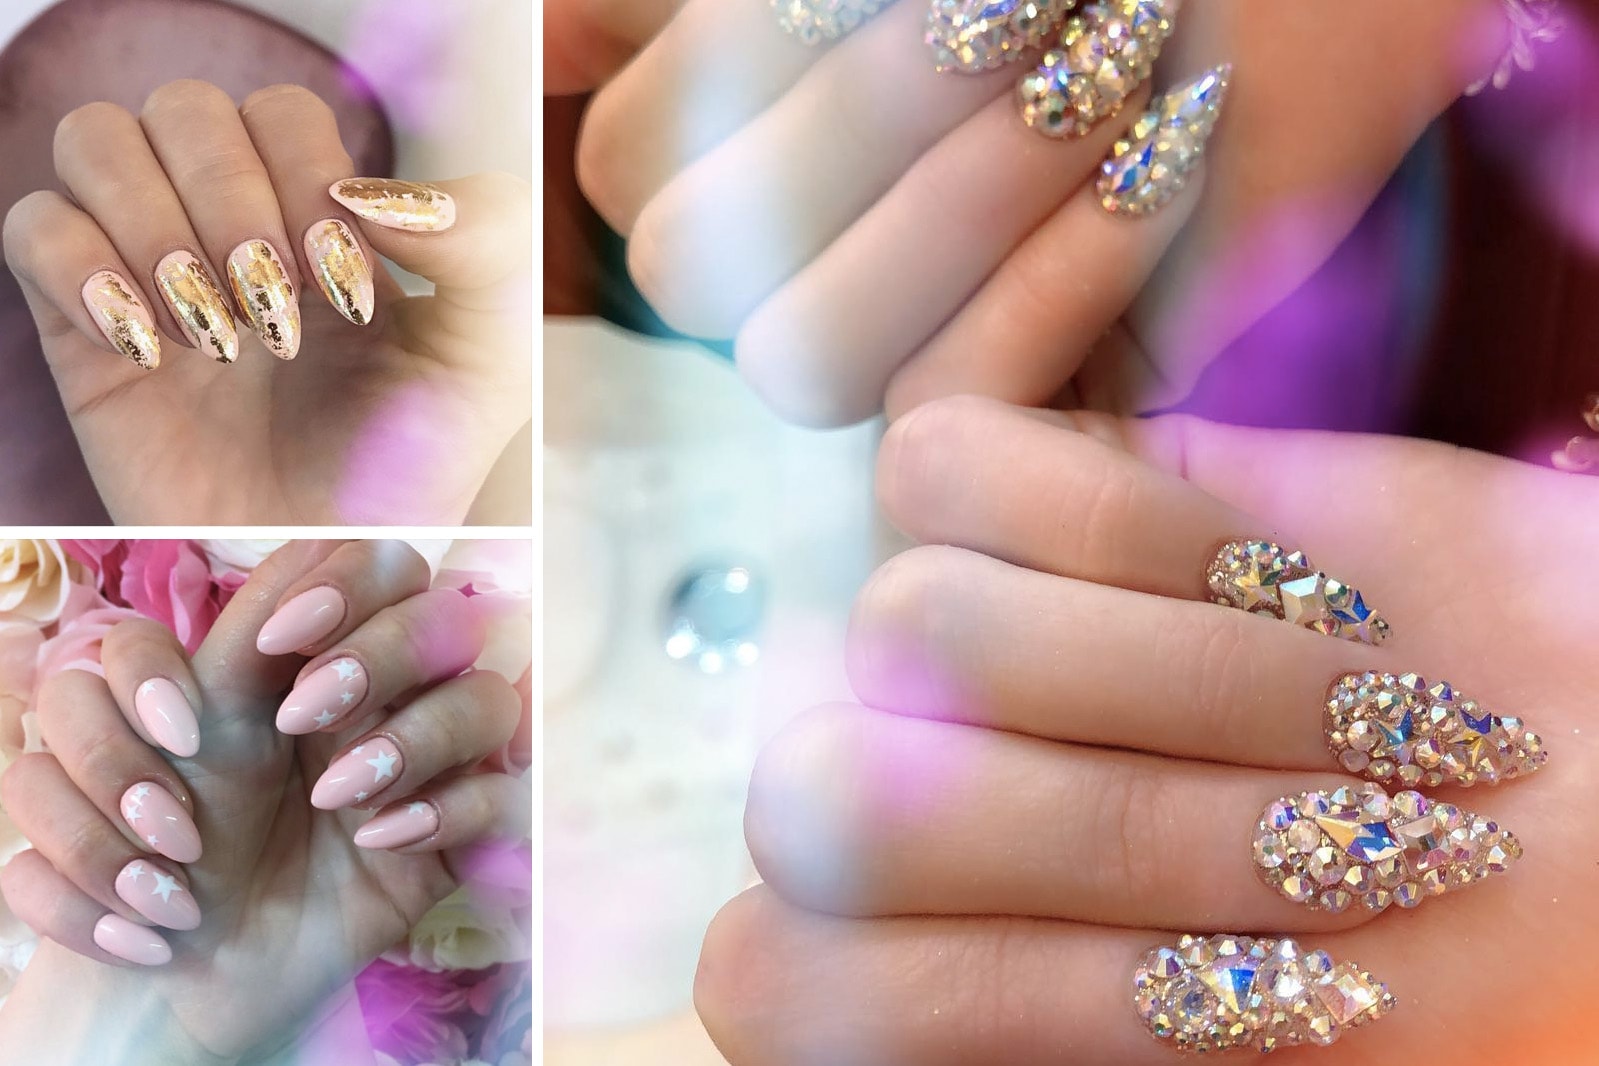 4. South Auckland Nail Art Salons - wide 6